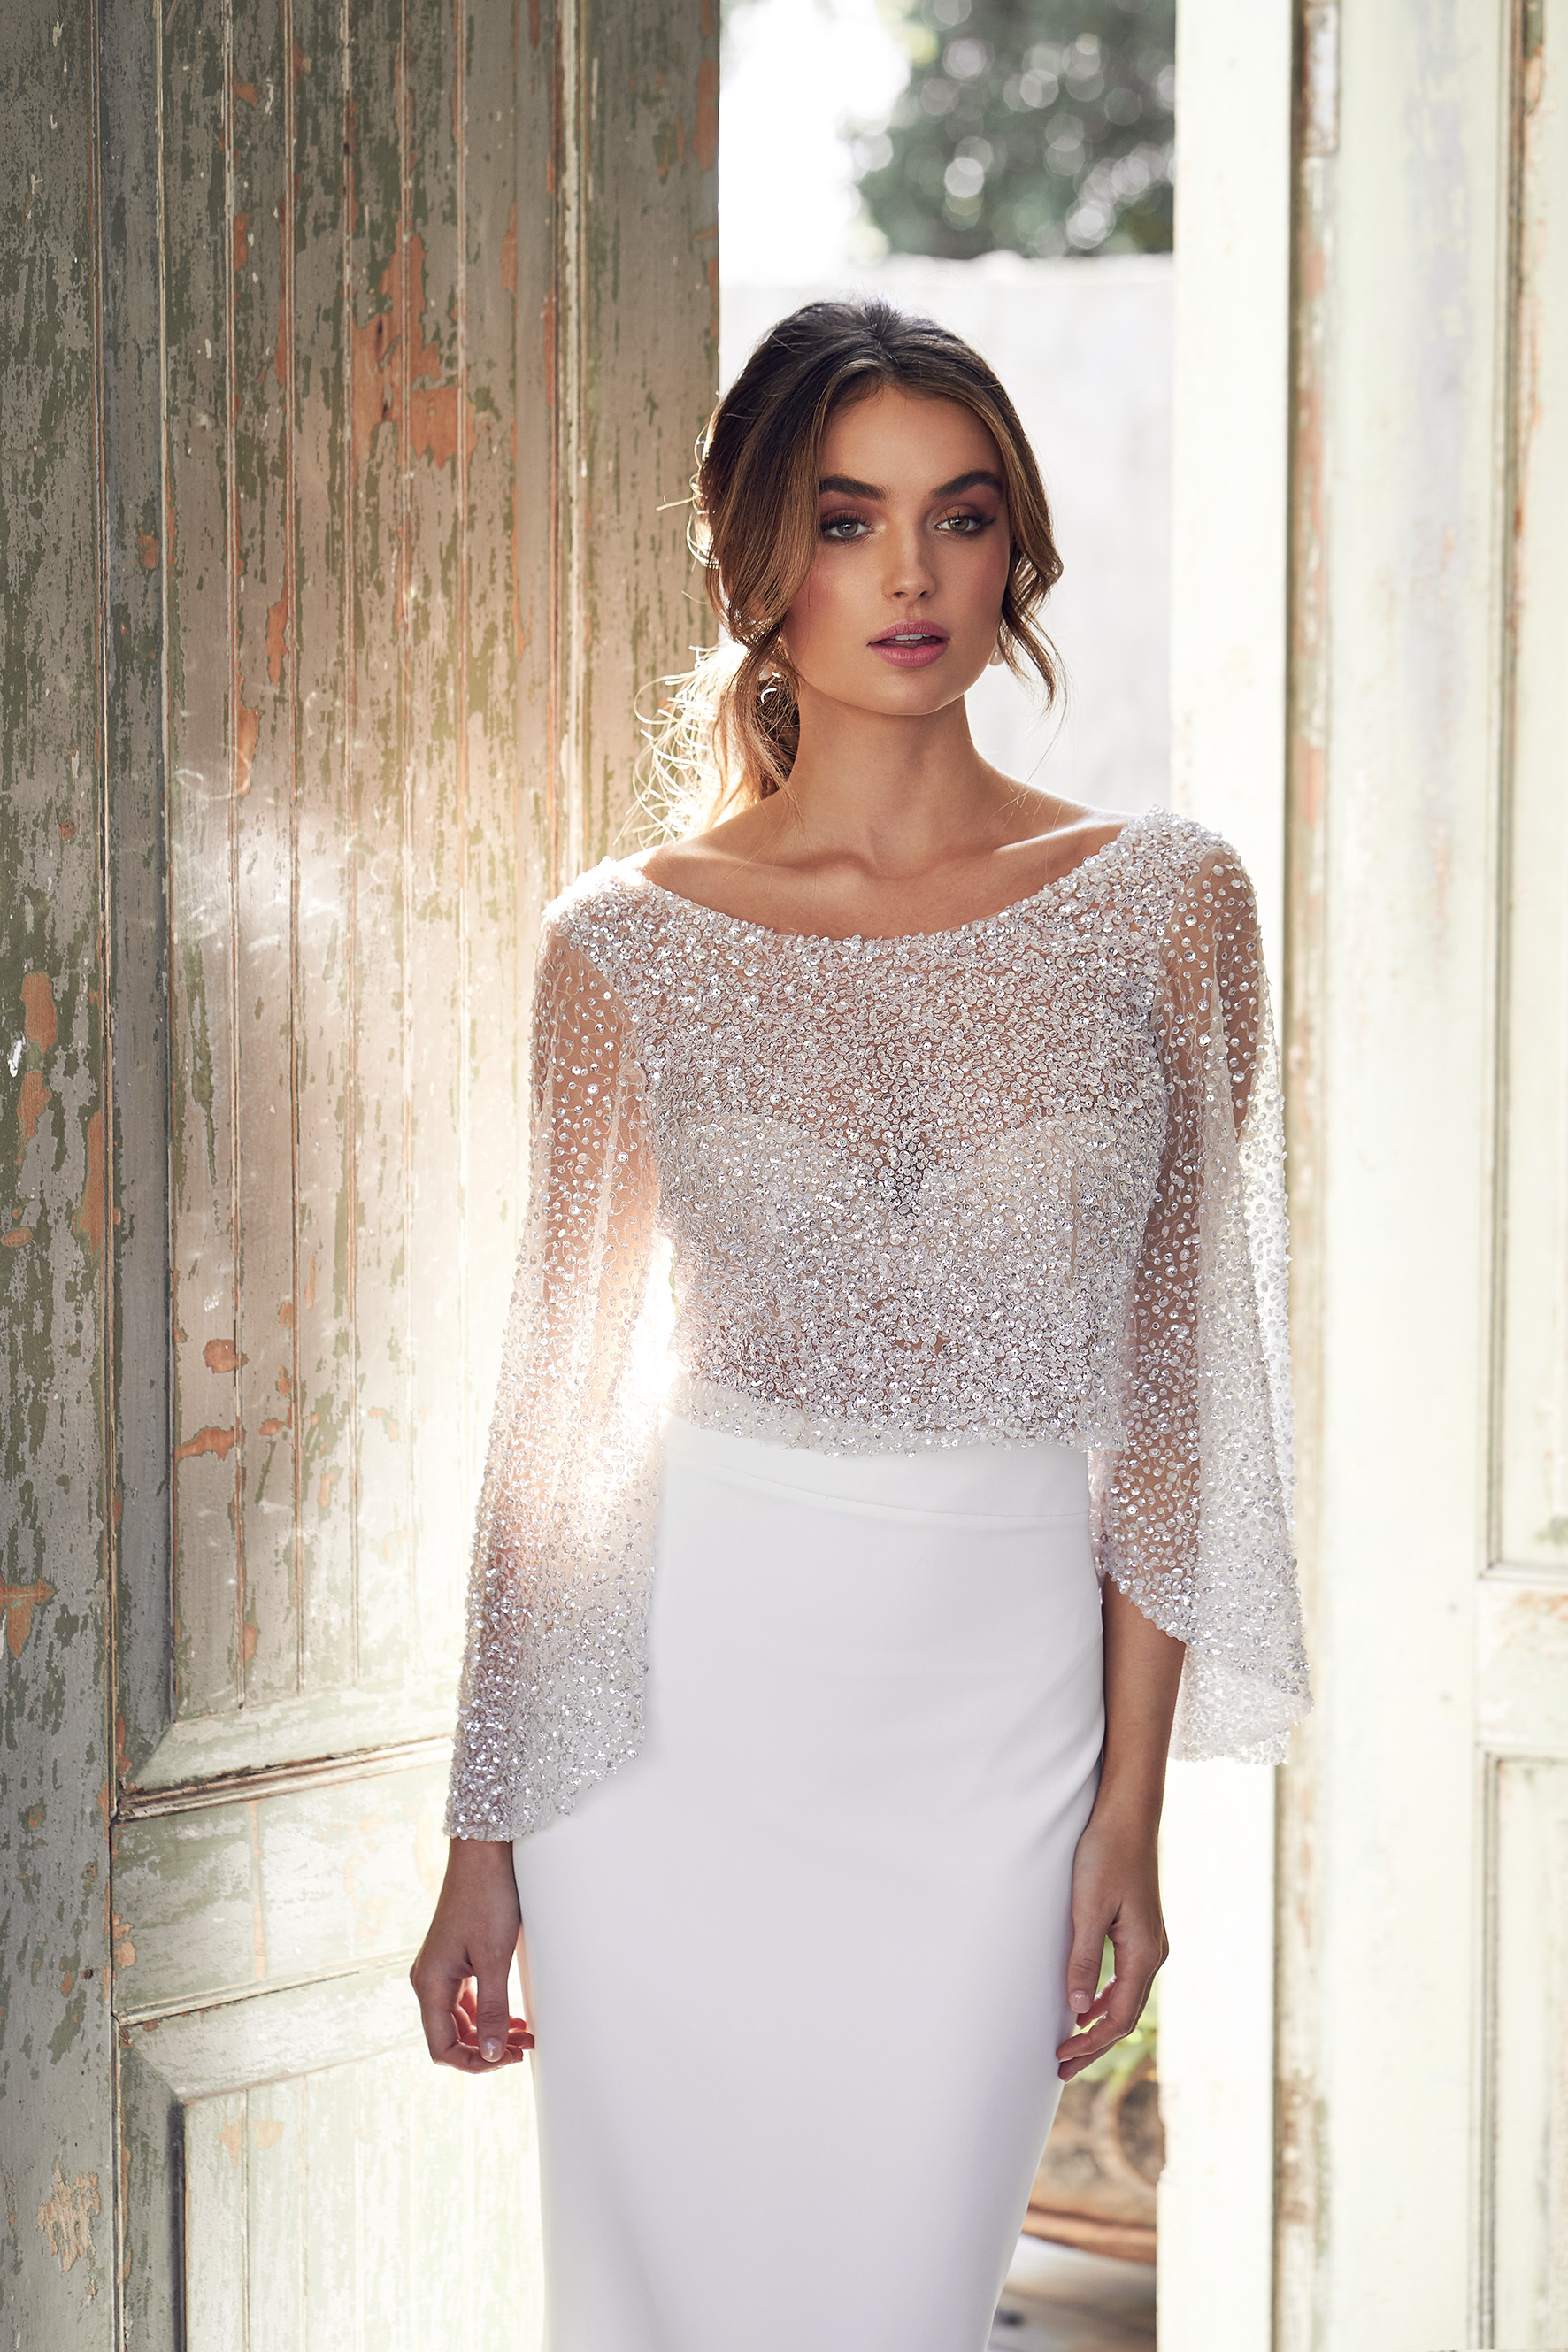 44 Bridal Separates You Never Knew You Needed ⋆ Ruffled